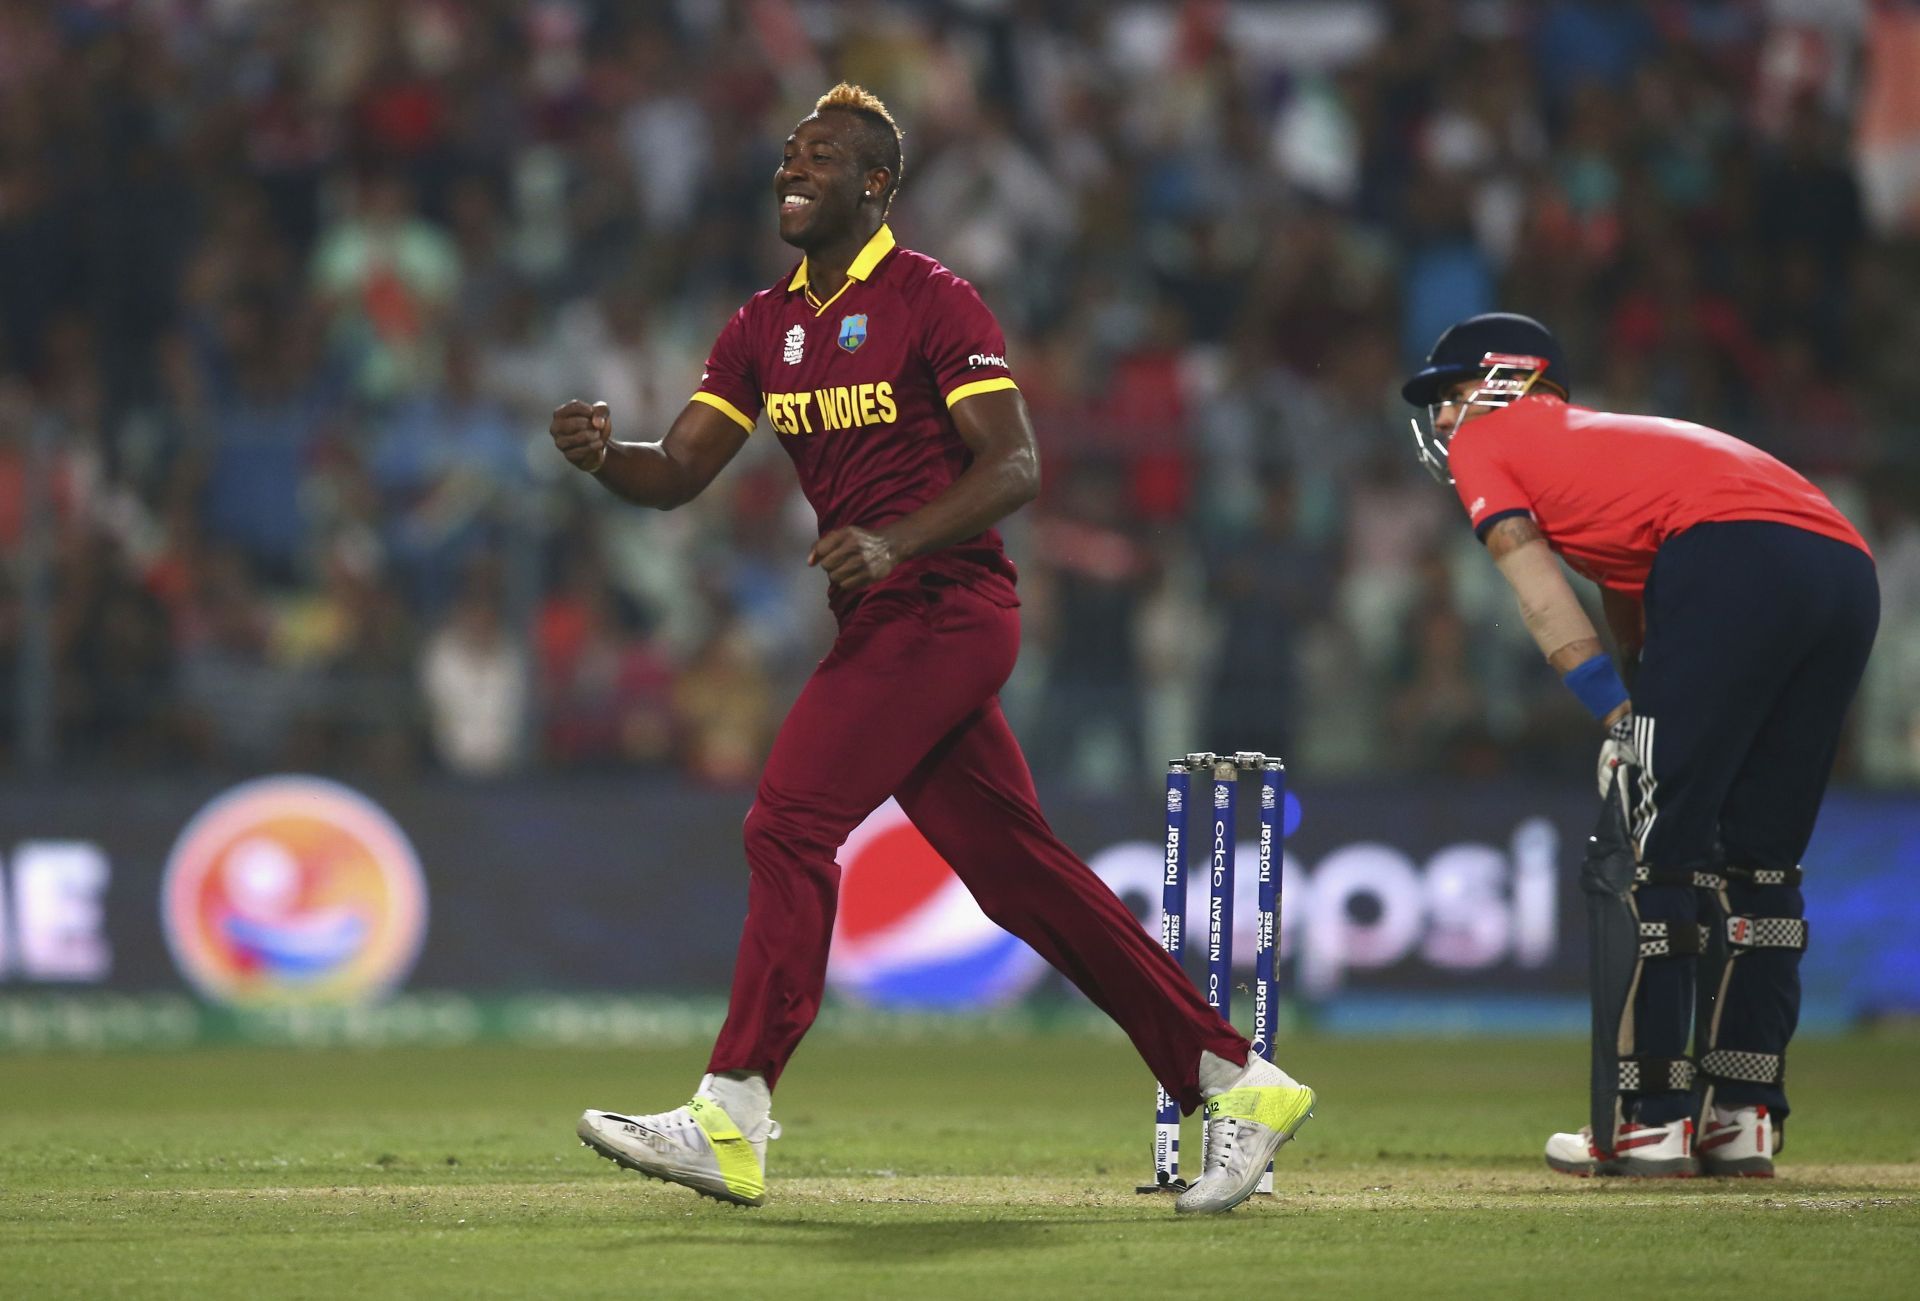 Andre Russell will be the player to watch out for in Match 14 of ICC T20 World Cup 2021